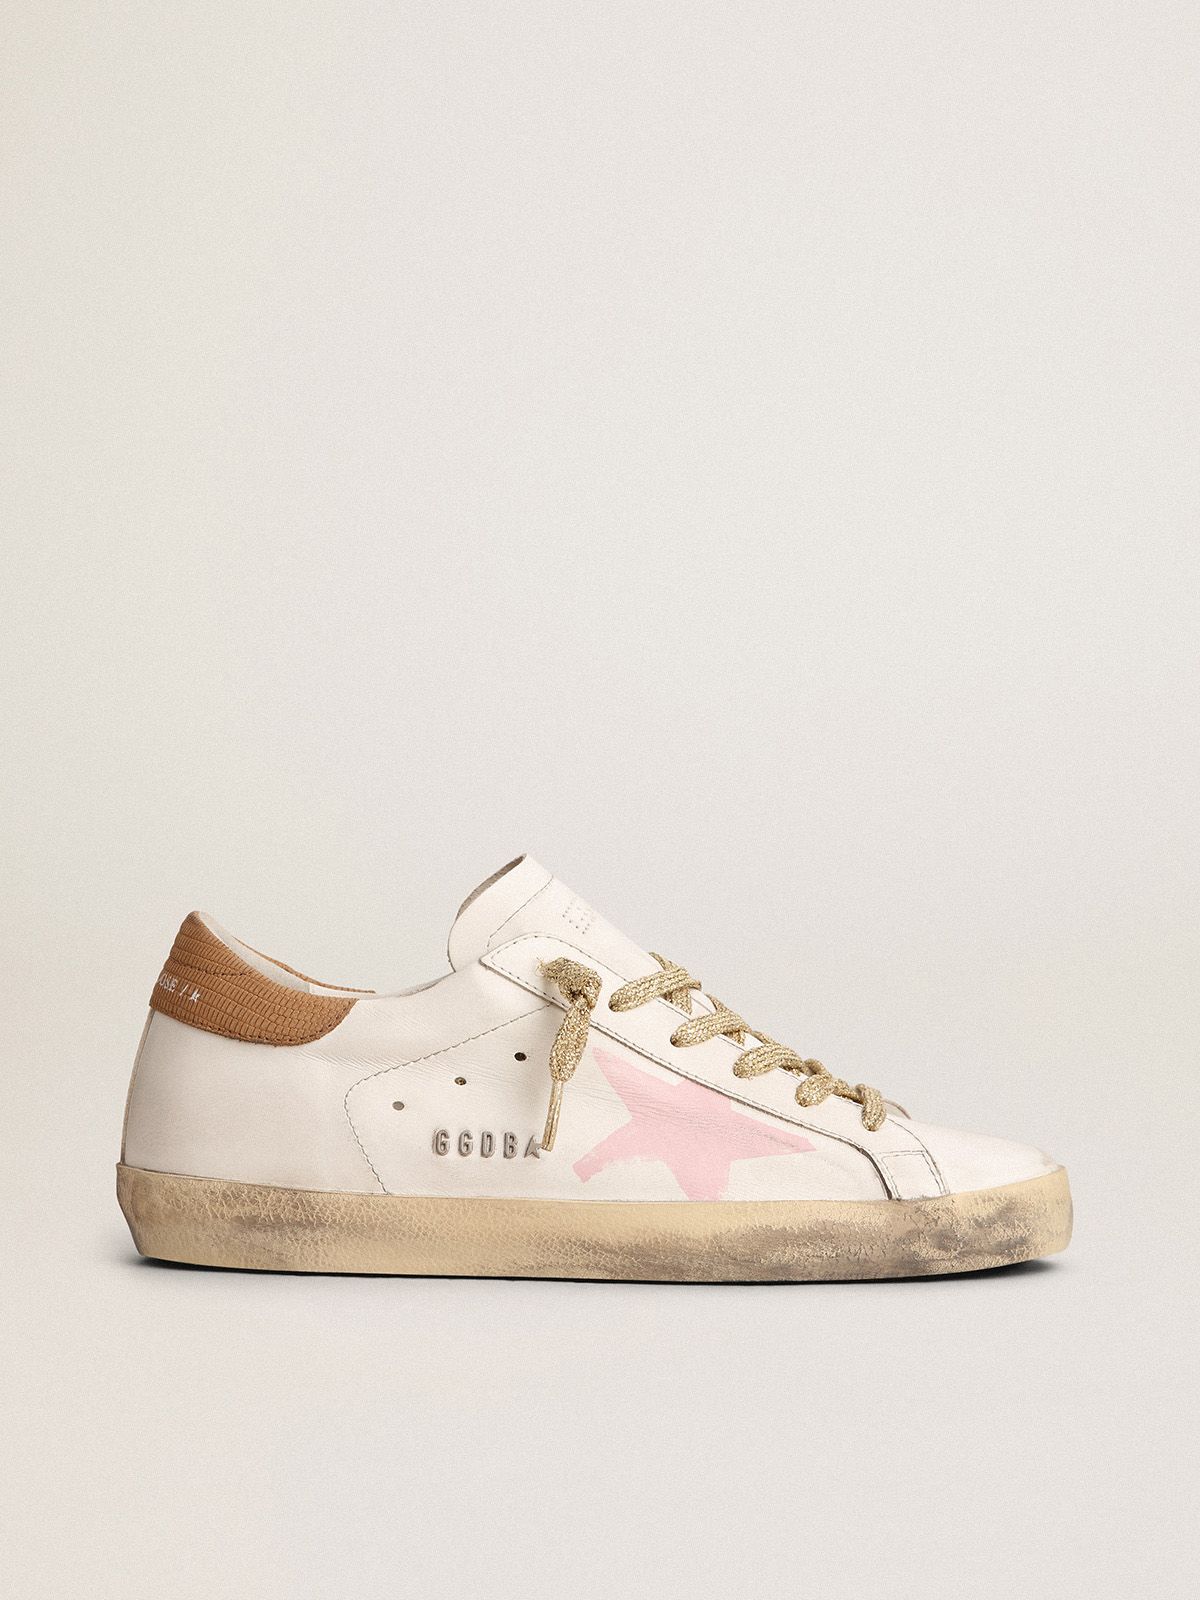 golden goose printed screen with star LTD Super-Star snake-print heel sneakers leather pink tab and